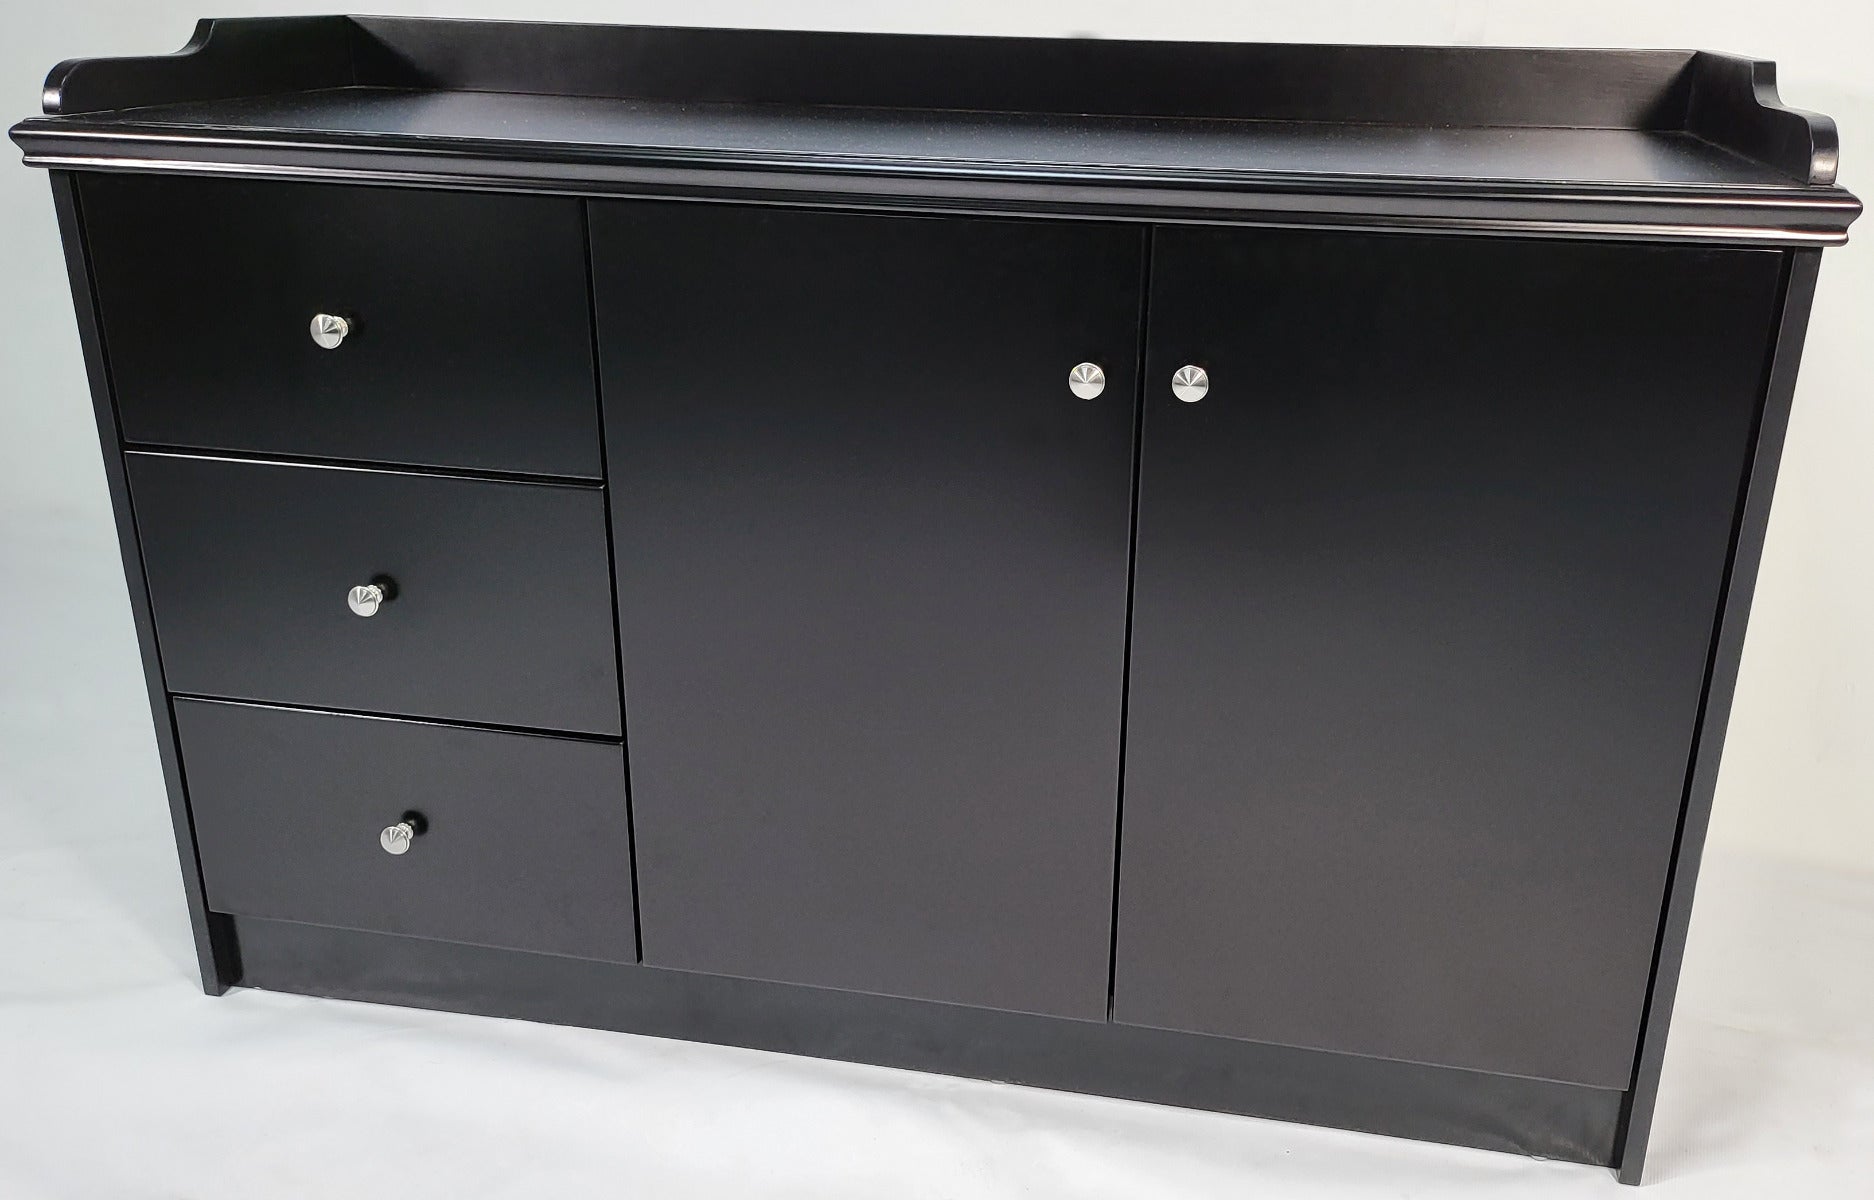 120cm Wide Black Cupboard with Integrated Drawers - 2K01